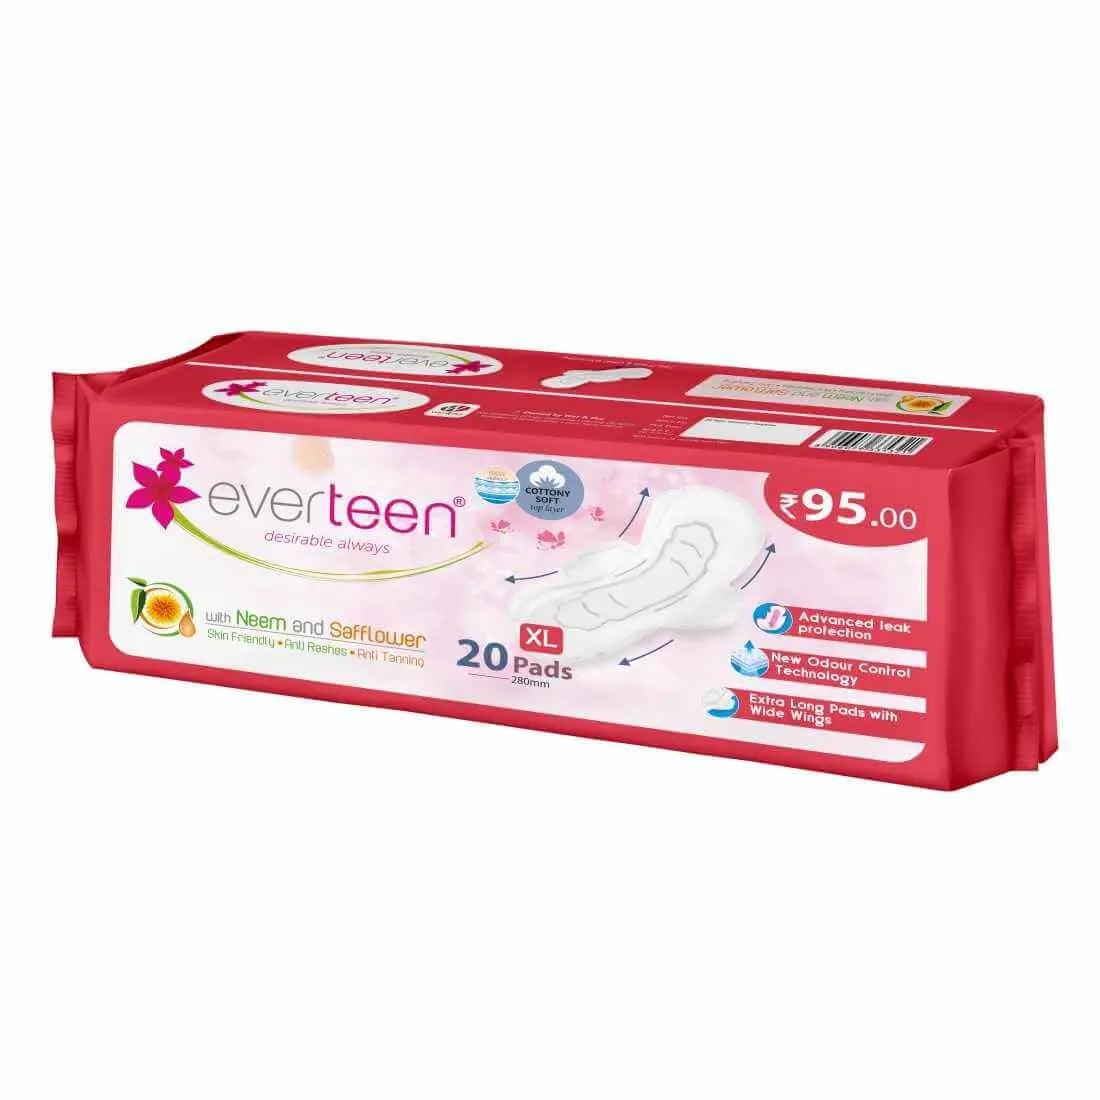 everteen XL Sanitary Napkin Pads with Neem and Safflower for Women - 20 Pads, 280mm 8906079335321